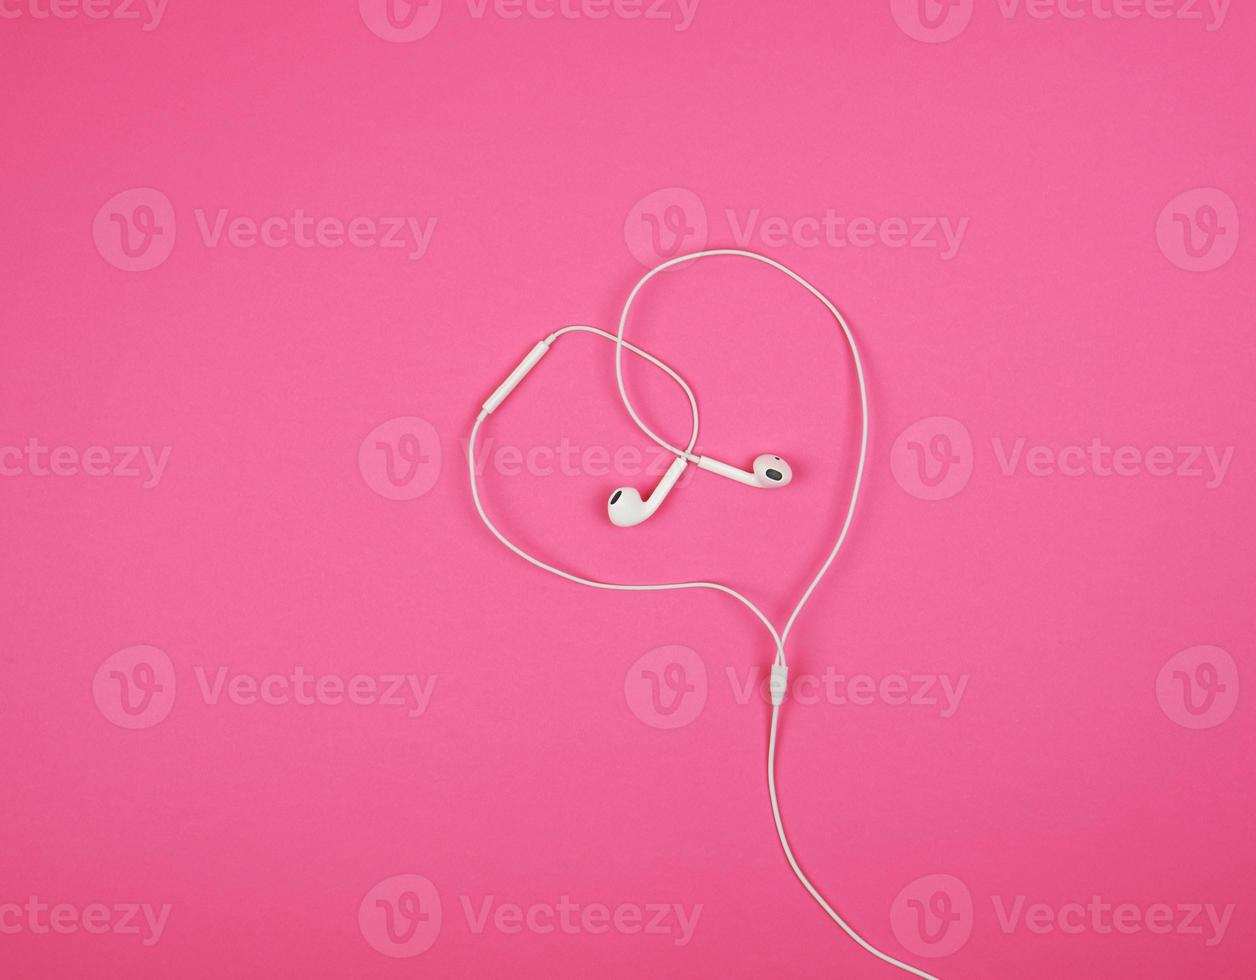 white headphones with a cable on a pink background photo